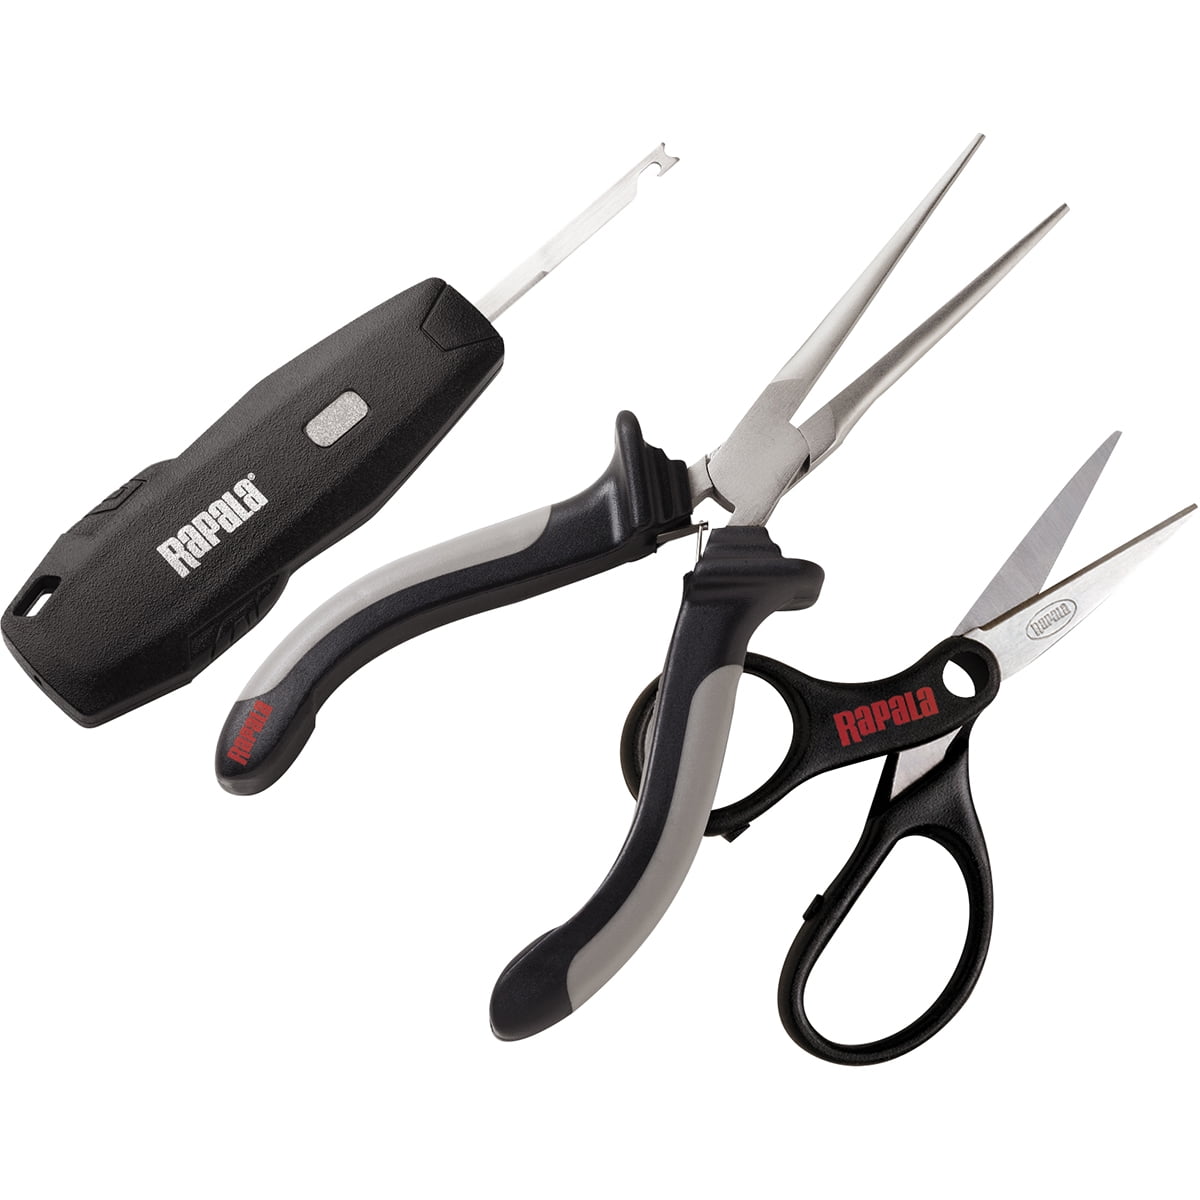 Rapala Panfish Tool Combo with Pliers, Scissors and Hook Remover